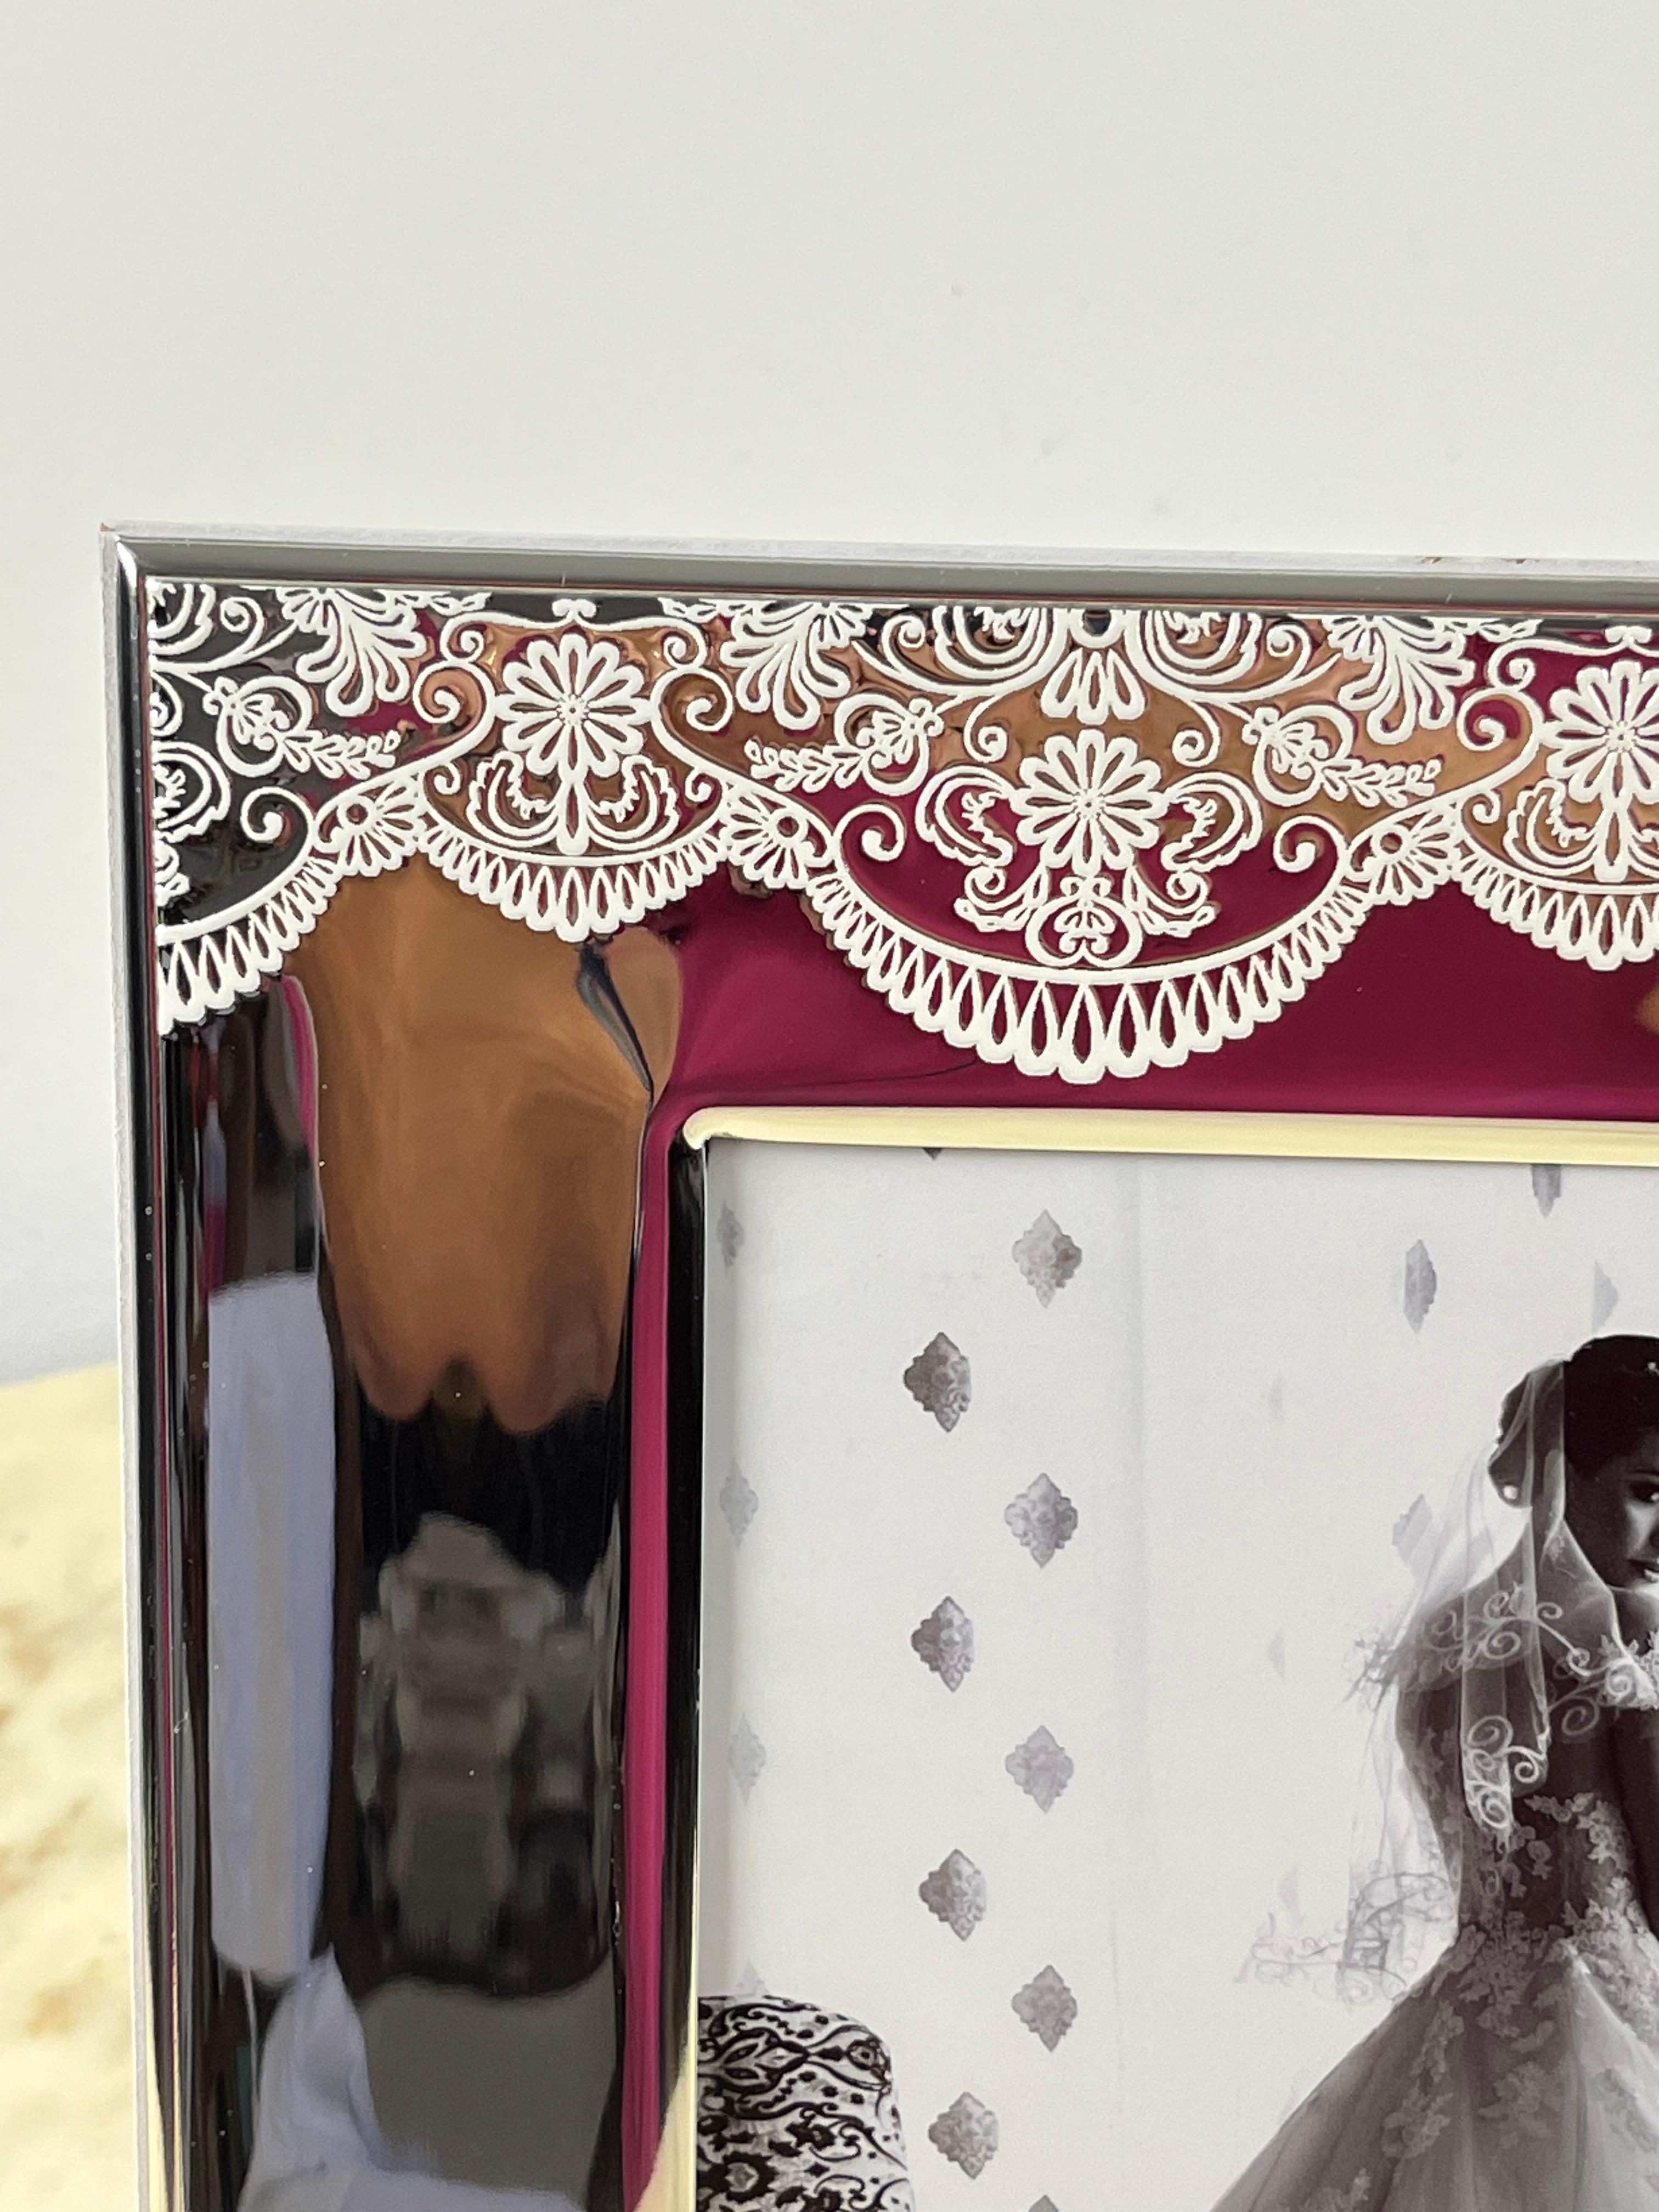 Italian Silver Plate Photo Frame/Mirror, lace design, new For Sale